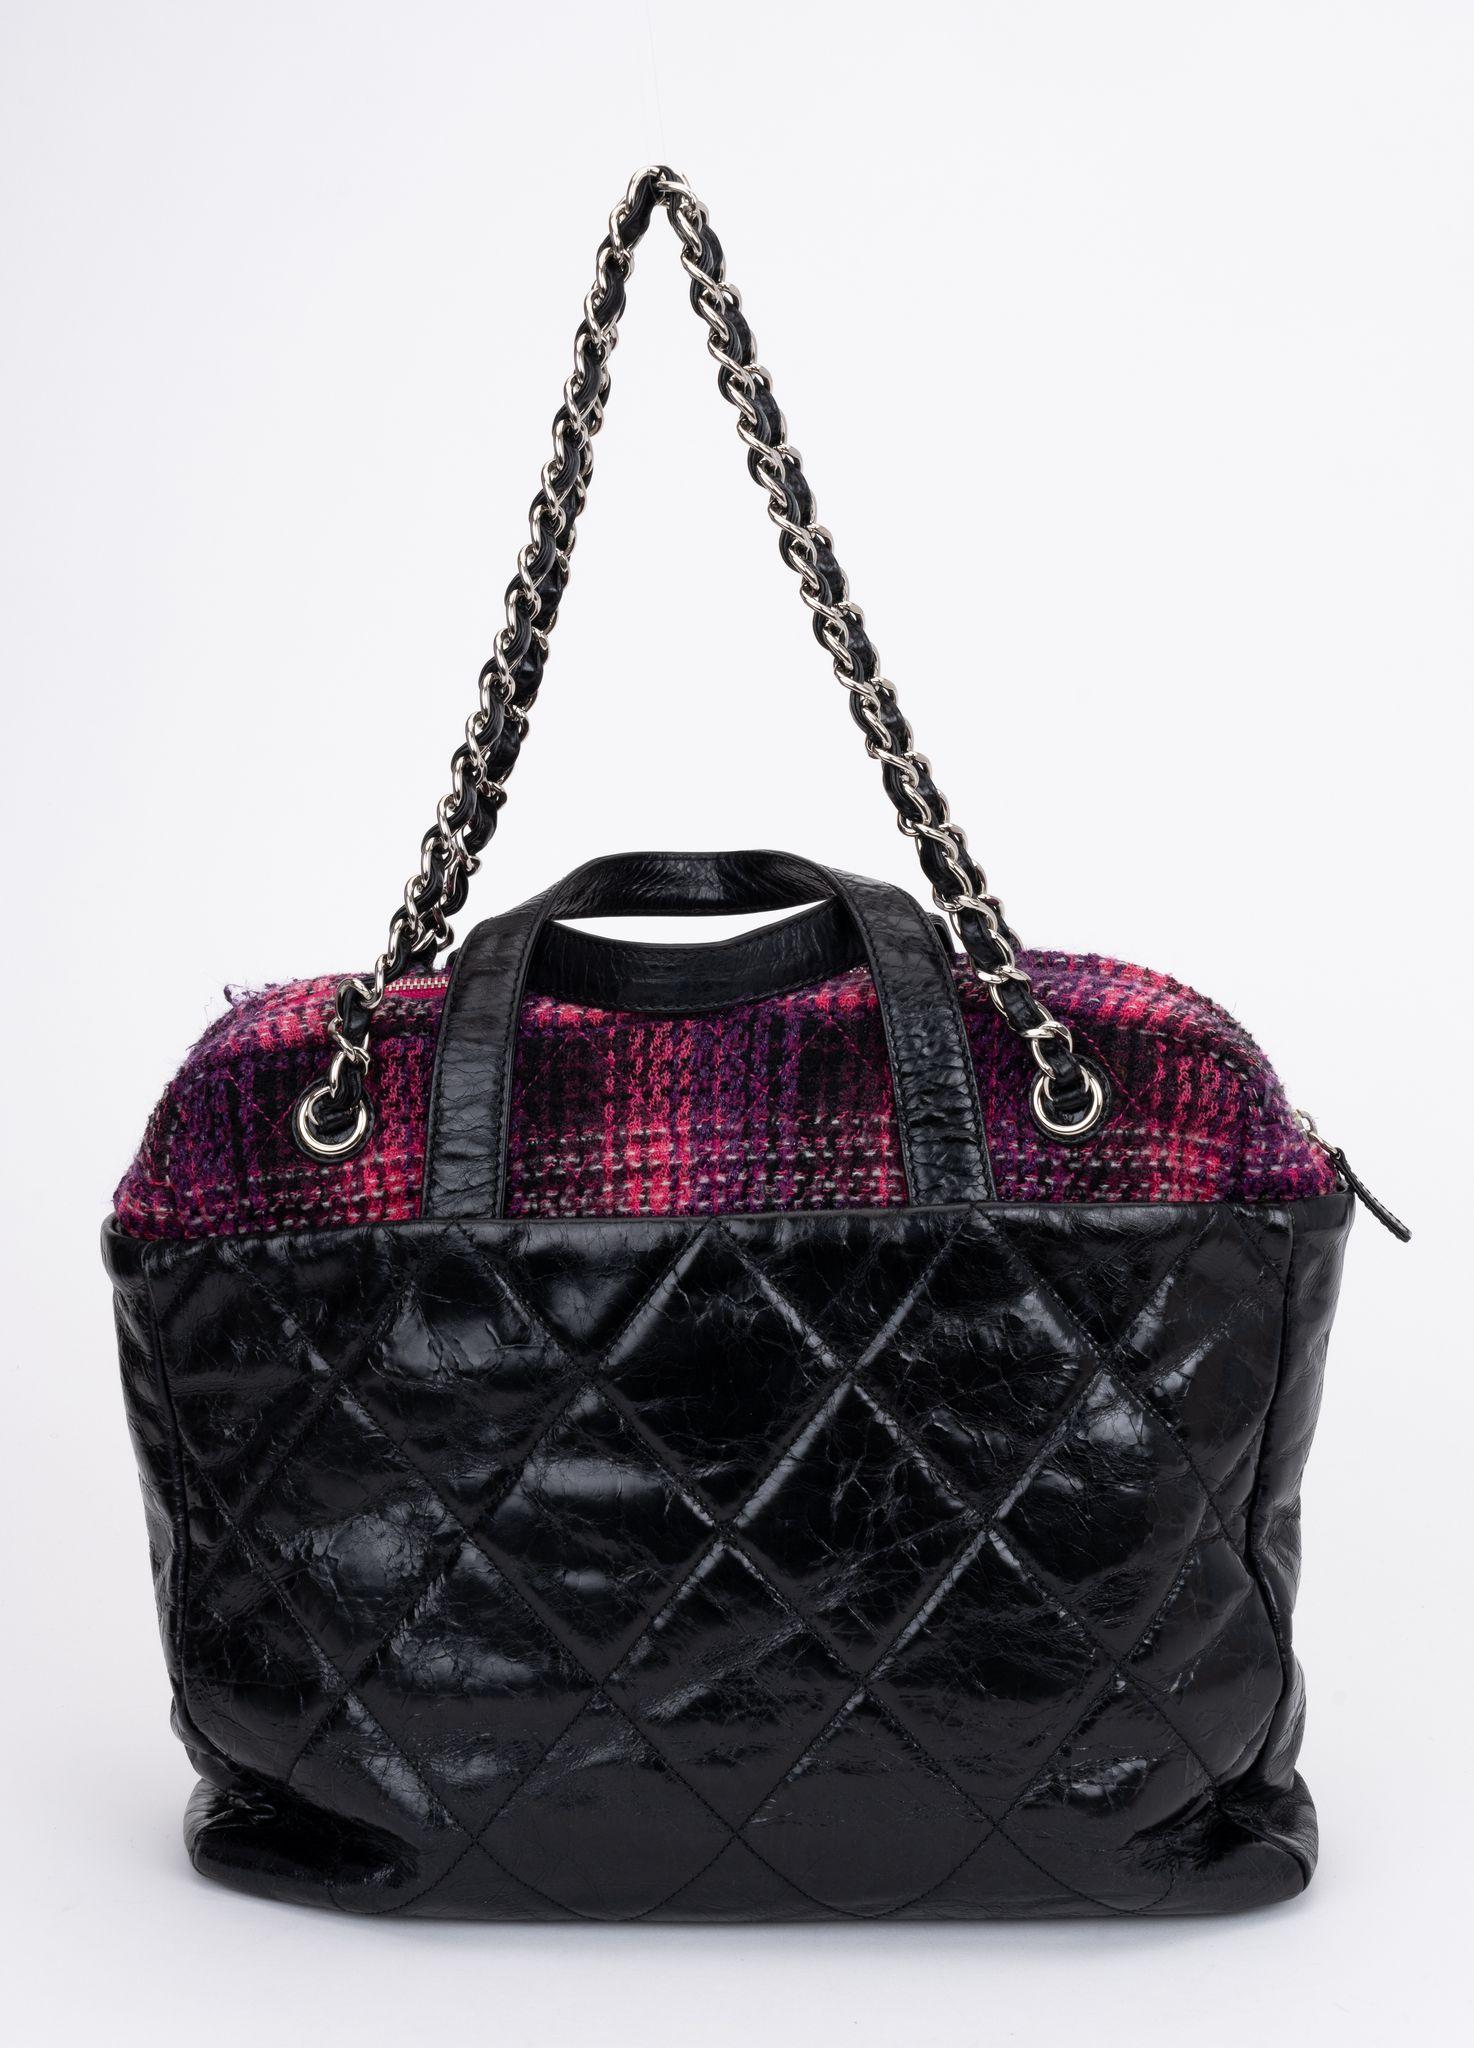 Chanel Black & Fuchsia 2 Way Tote Bag In Excellent Condition For Sale In West Hollywood, CA